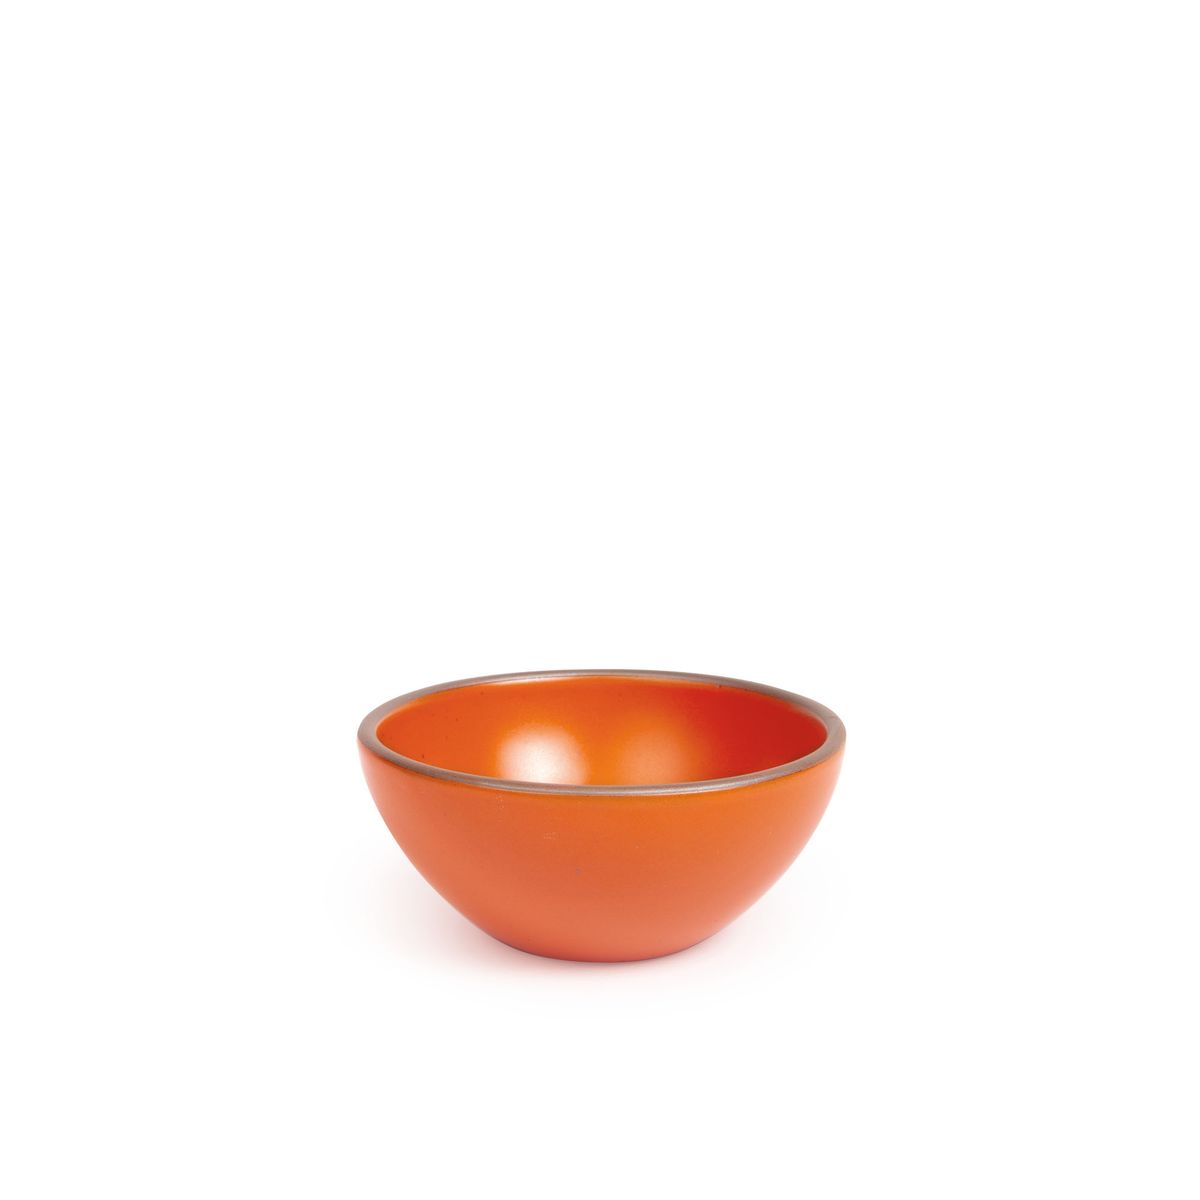 A small dessert sized rounded ceramic bowl in a bold orange color featuring iron speckles and an unglazed rim